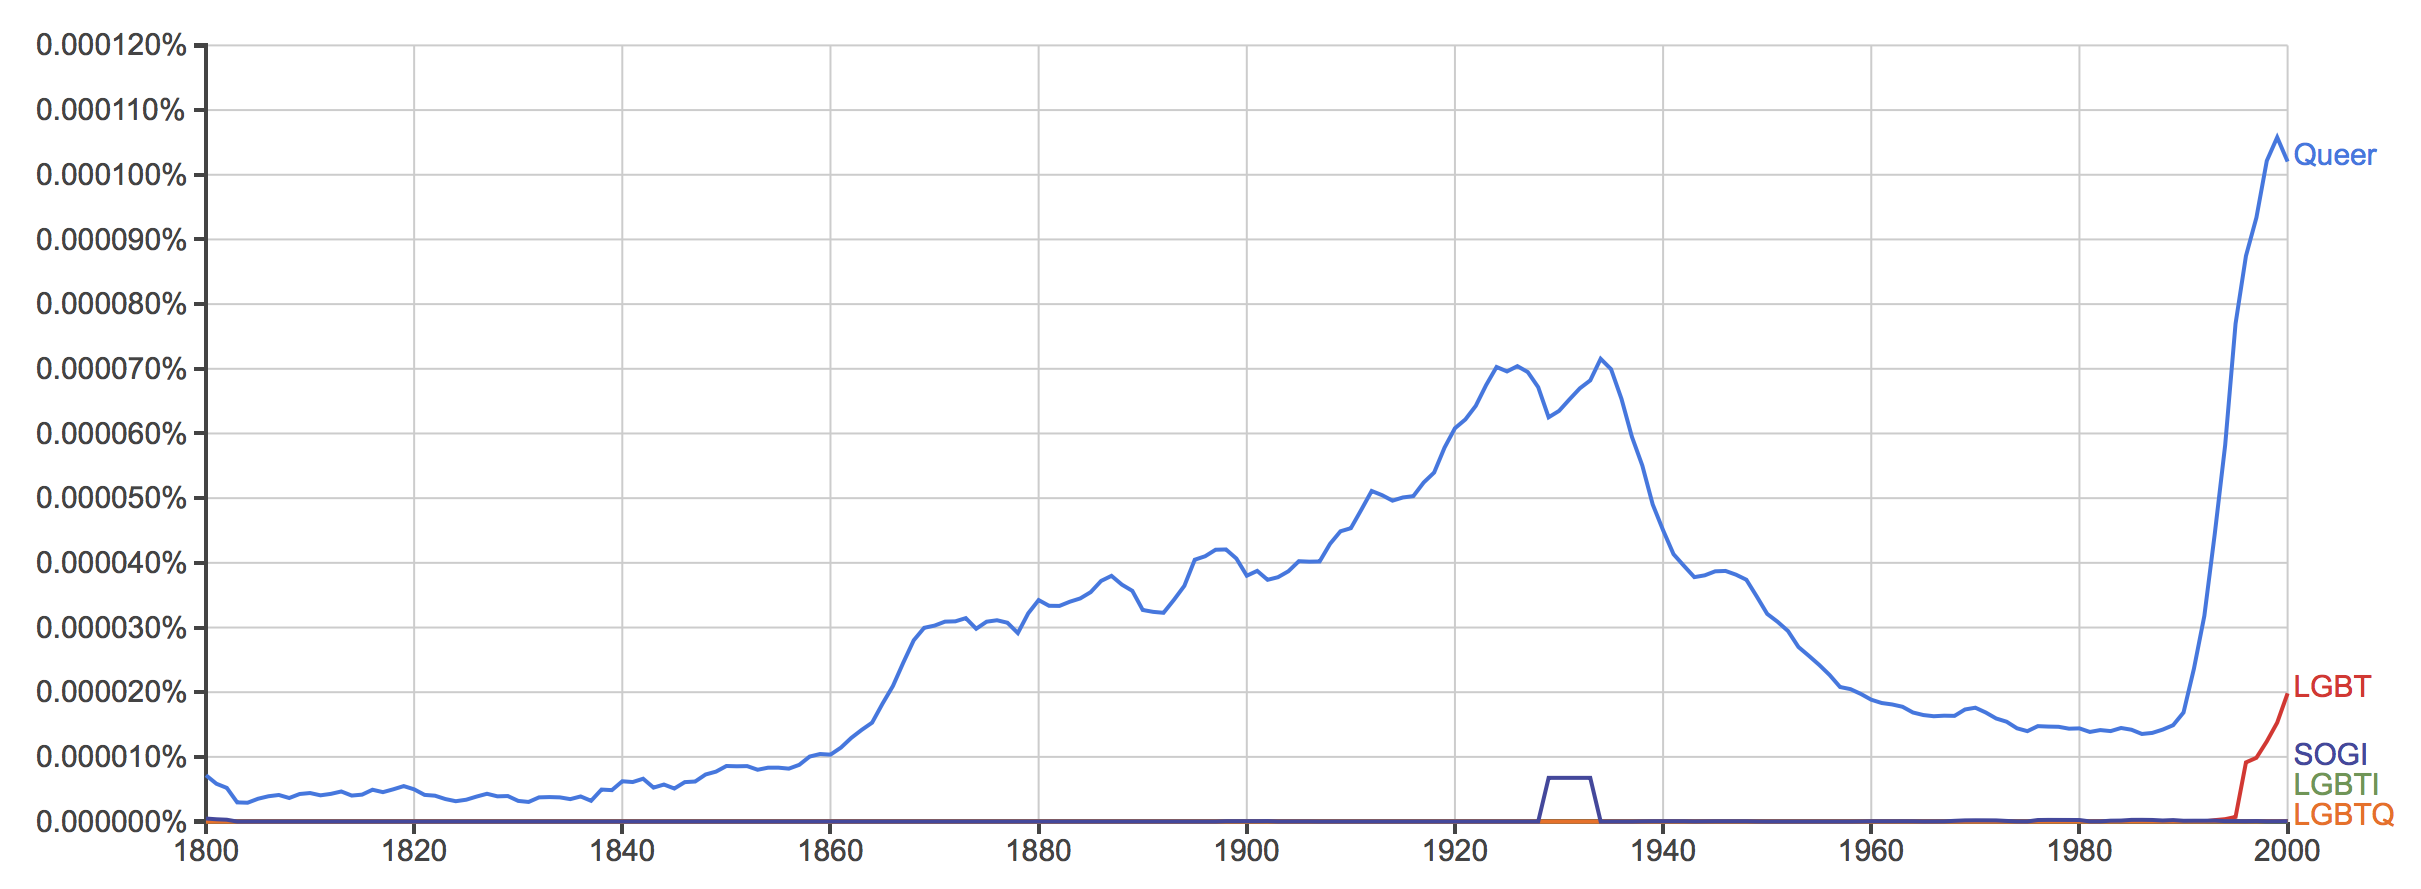 Chart showing counts of search terms. Queer is by far the most popular term from 1800 through 2008.